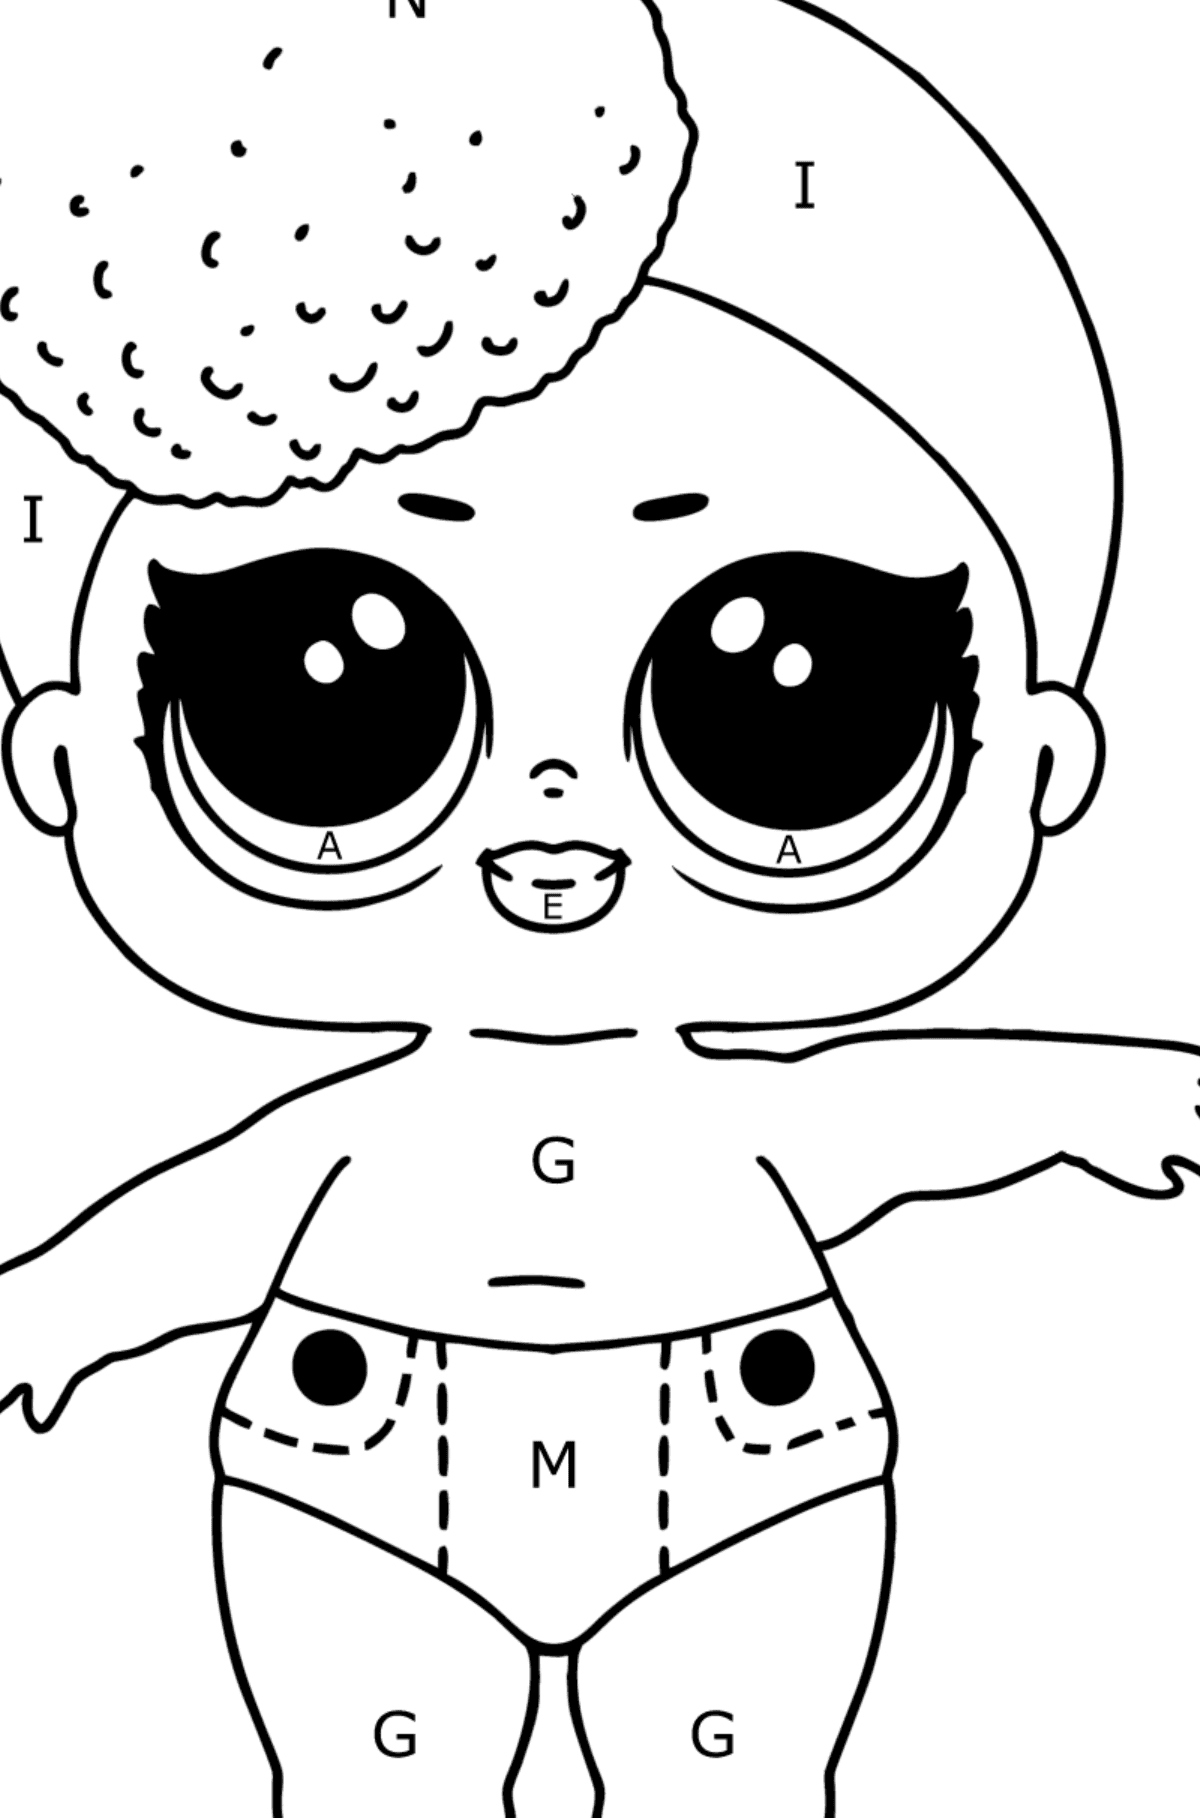 Coloring page LOL LIL Independent - Coloring by Letters for Kids